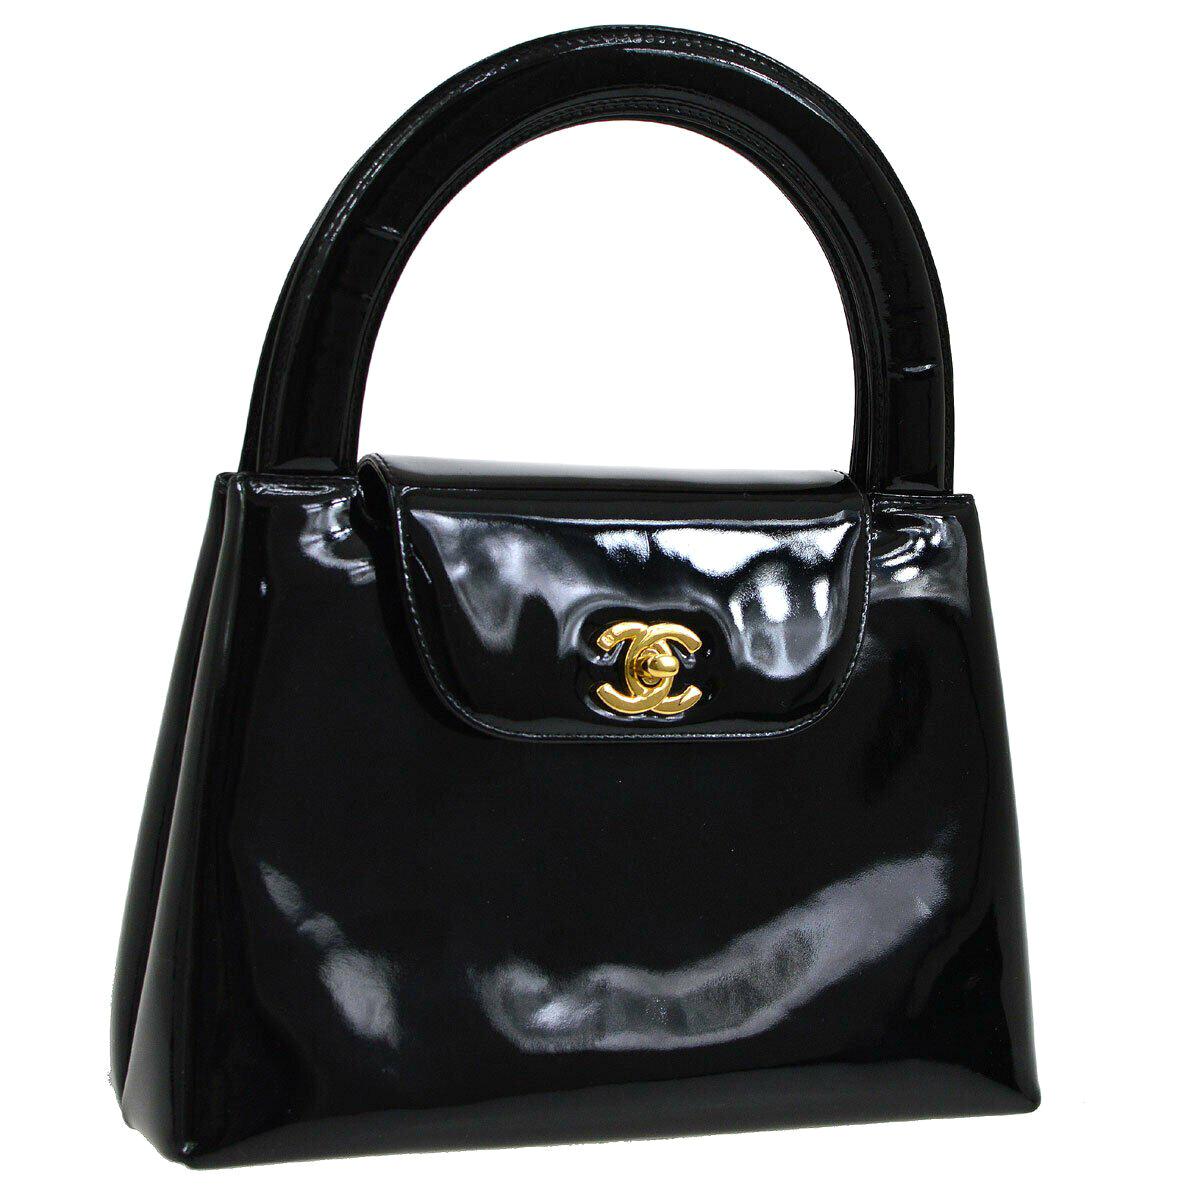 Chanel Black Patent Leather Kelly Style Top Handle Satchel Flap in